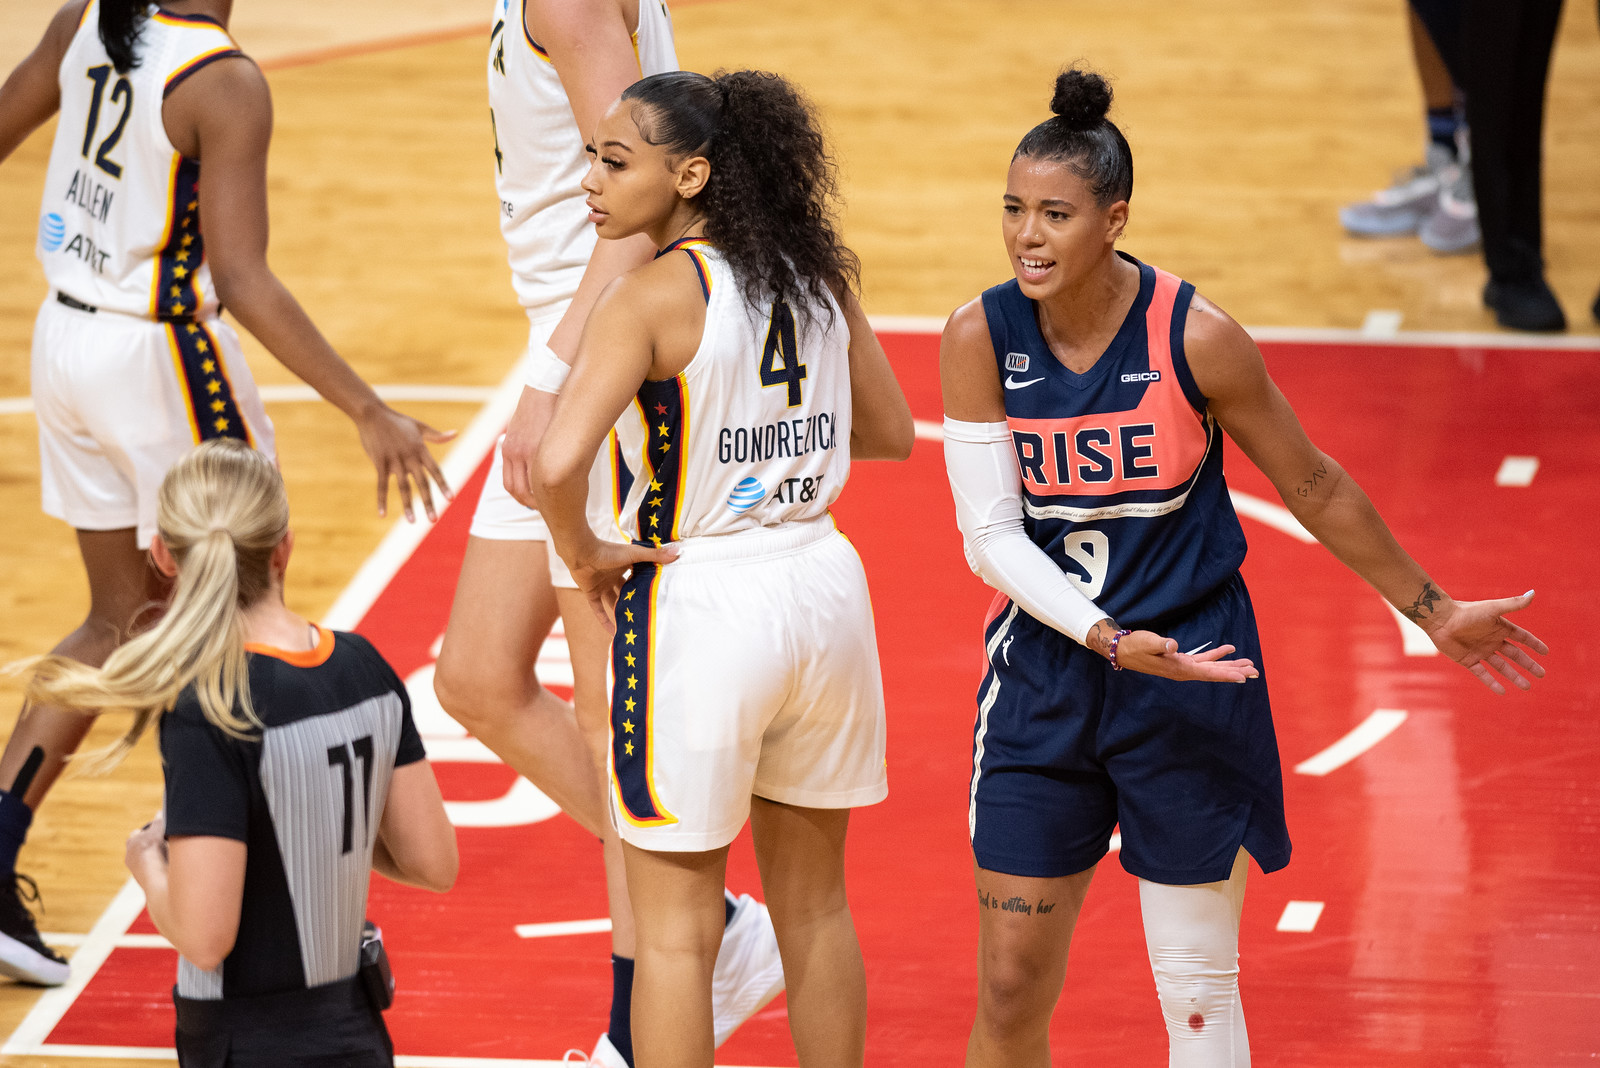 WNBA: Fever rookie Kysre Gondrezick set to show off her game and brand